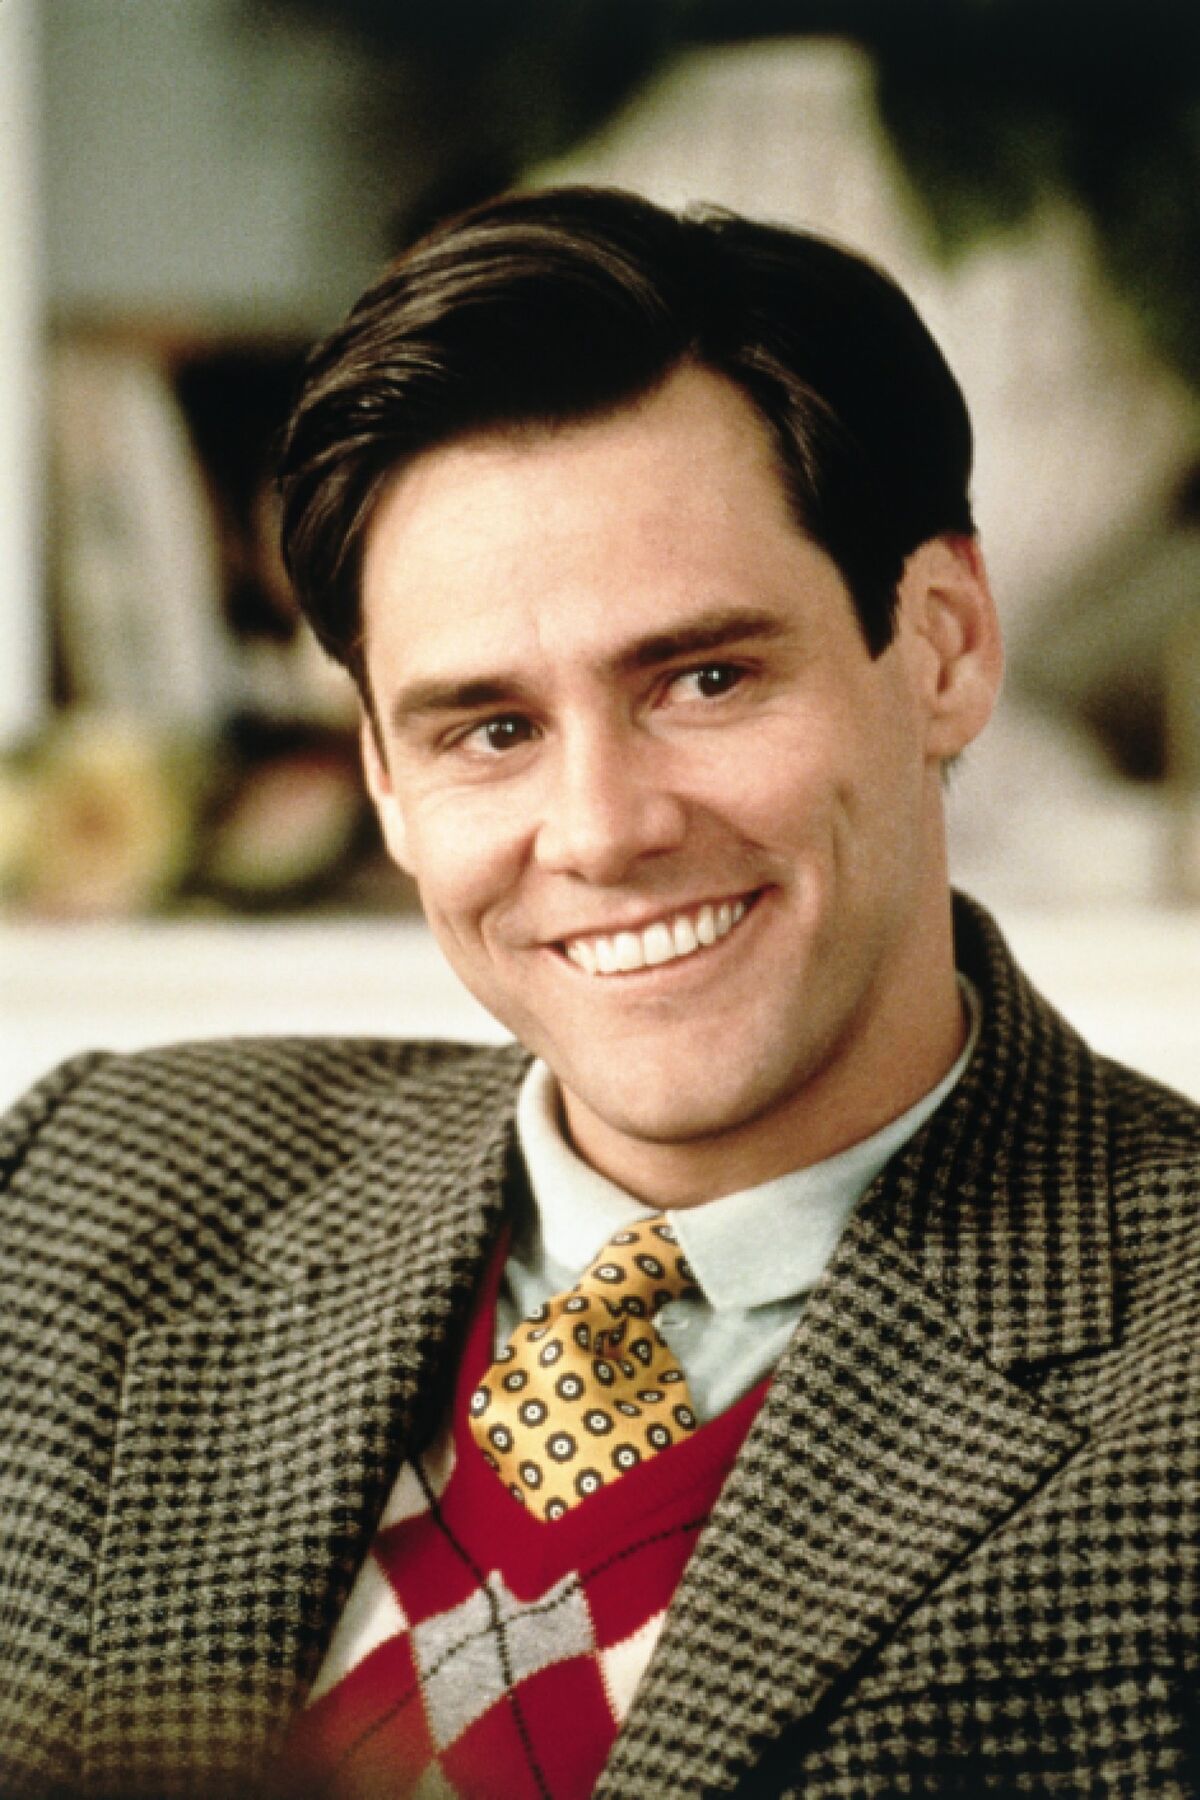 Truman Burbank (played by Jim Carrey) outfits on The Truman Show